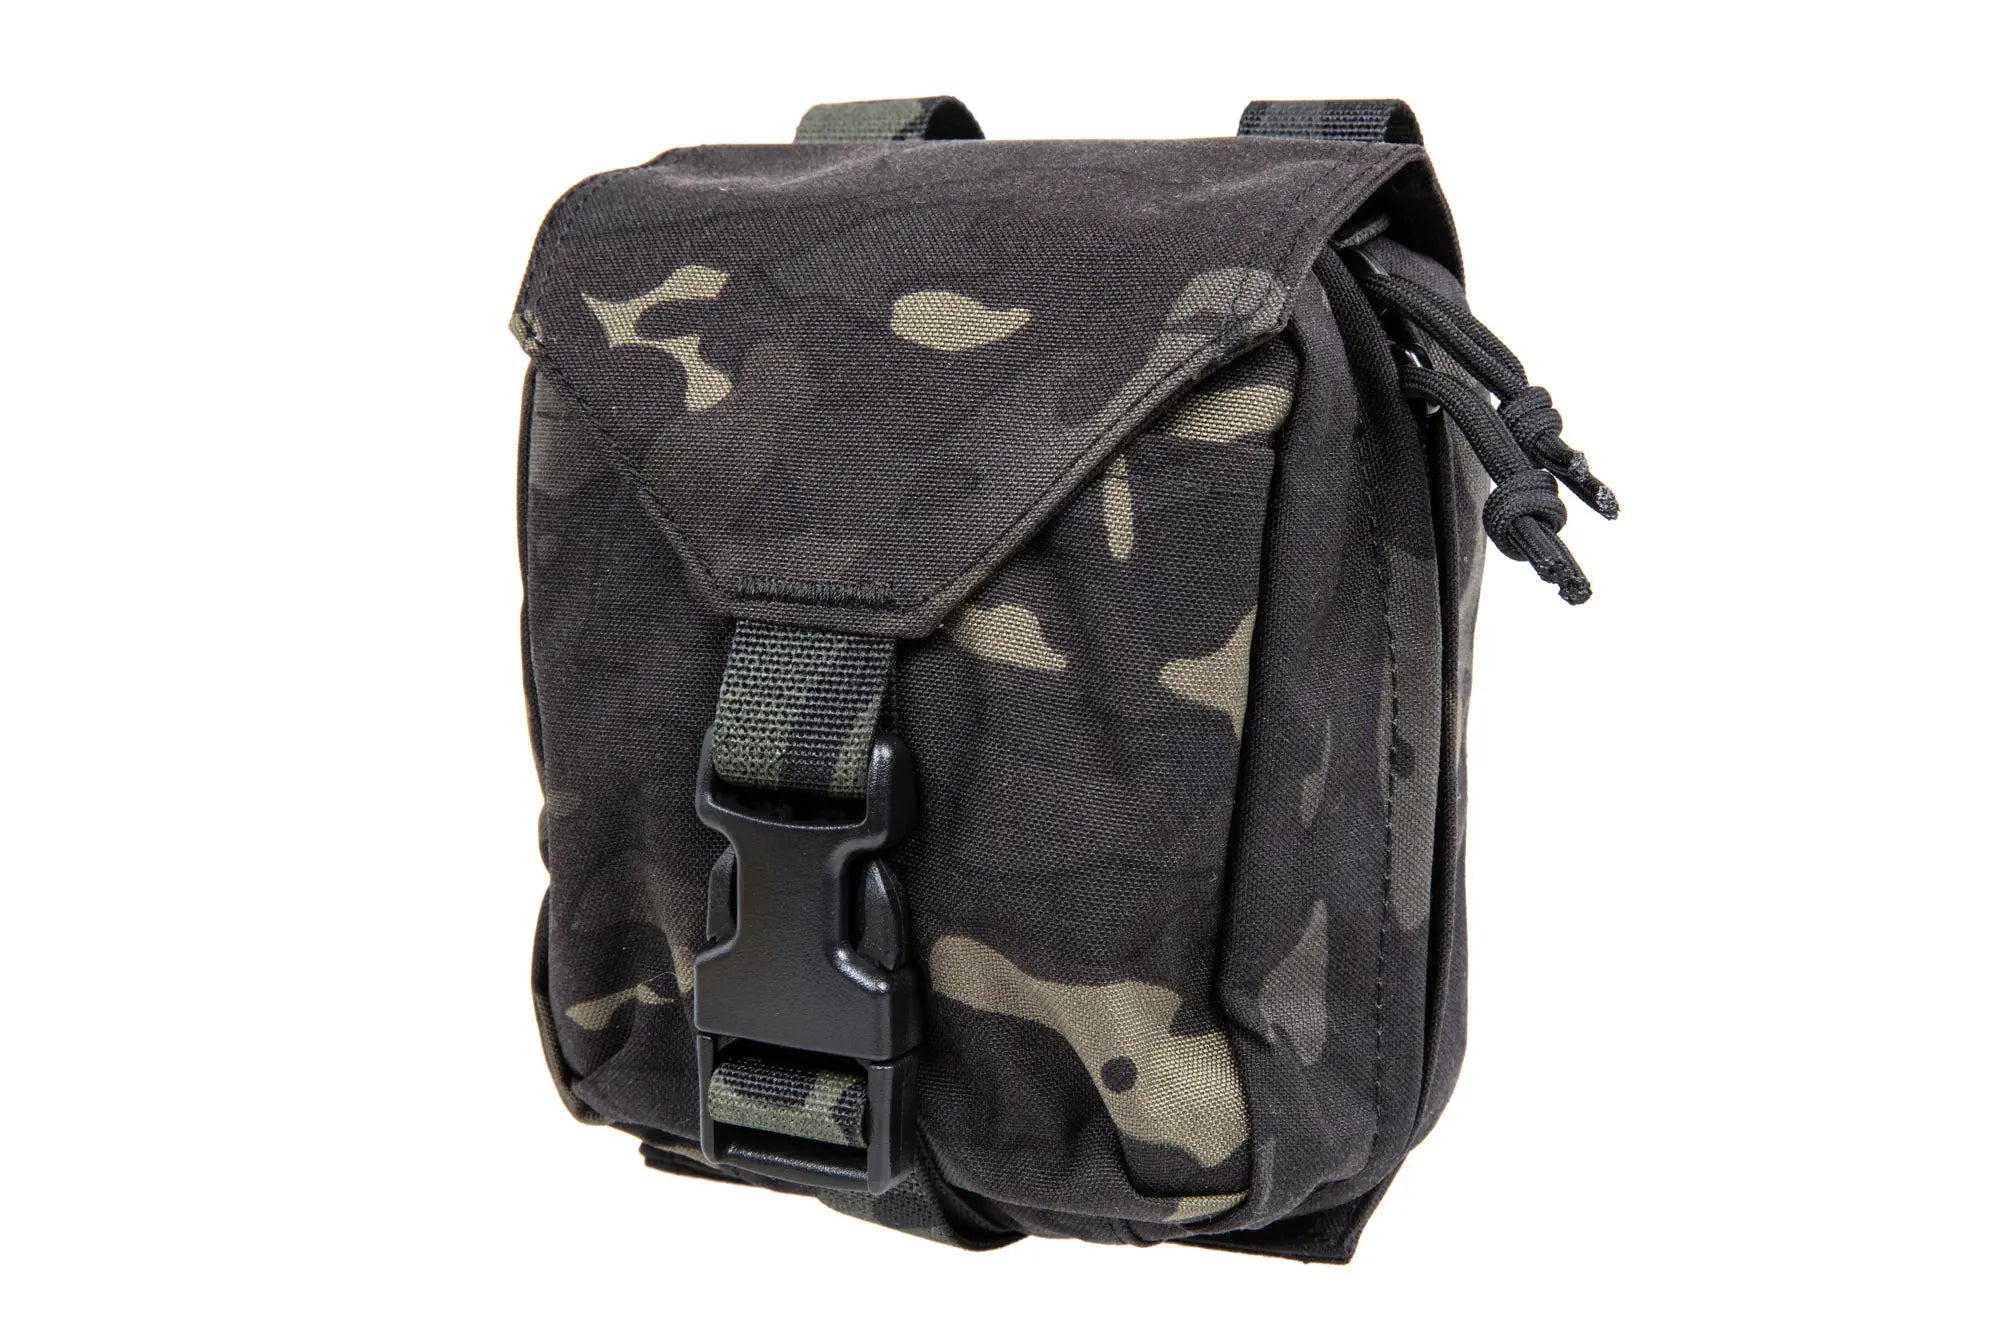 First aid kit with Molle panel Wosport Multicam Black-2